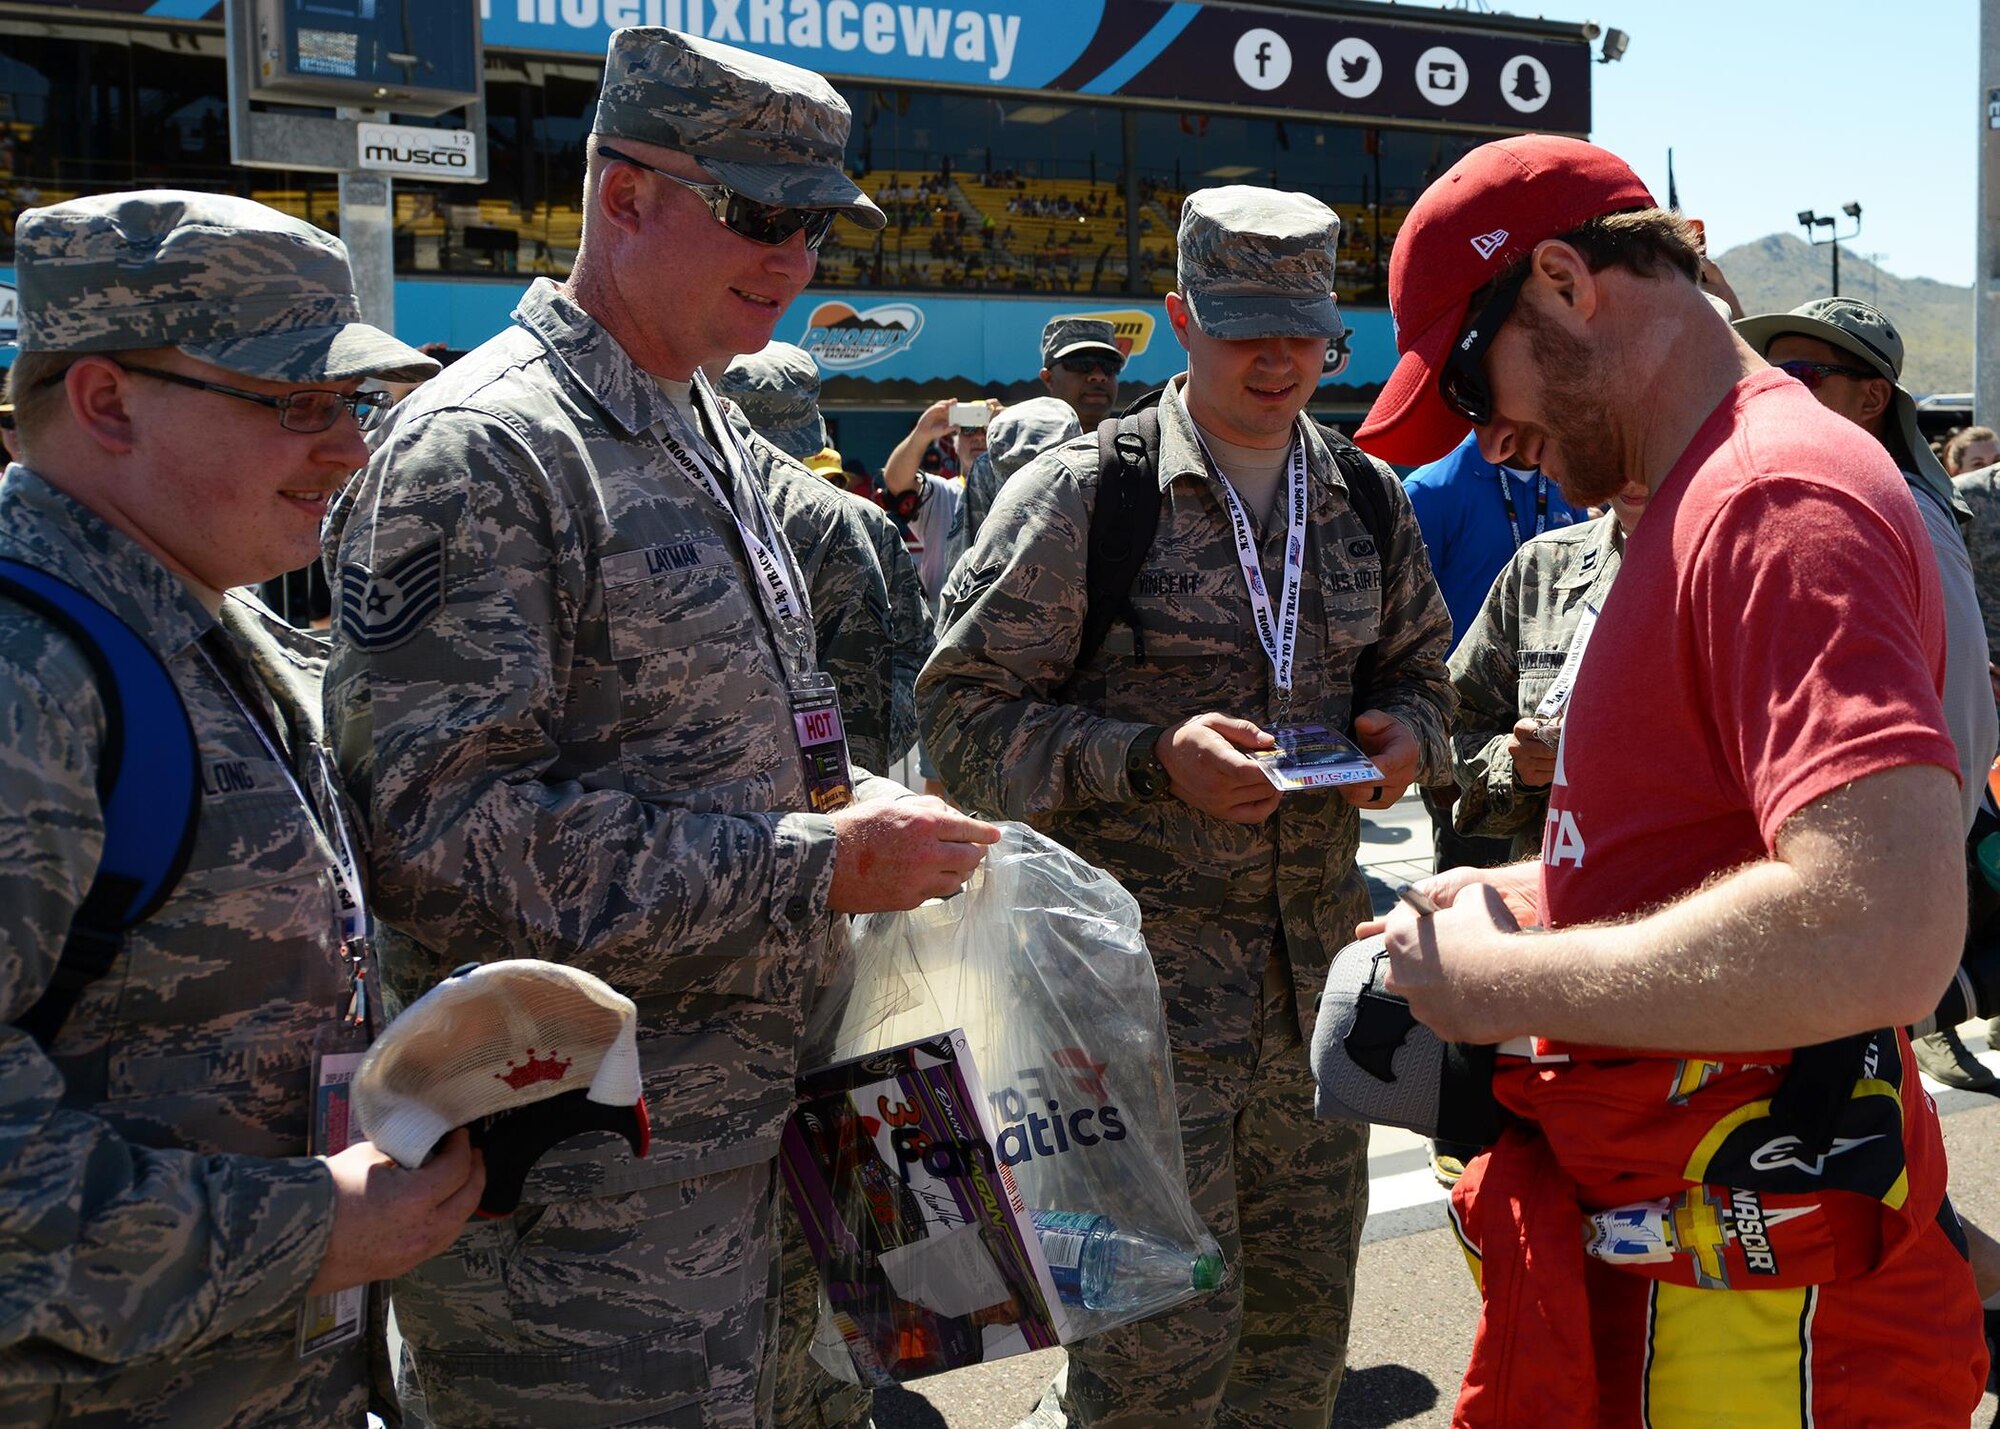 Dale Earnhardt Jr., NASCAR driver, autographs merchandise for Airmen during the introduction of the racers at the Camping World 500 Mar. 19, 2017, at the Phoenix International Raceway, Avondale, Ariz. (U.S. Air Force photo by Airman First Class Alexander Cook)